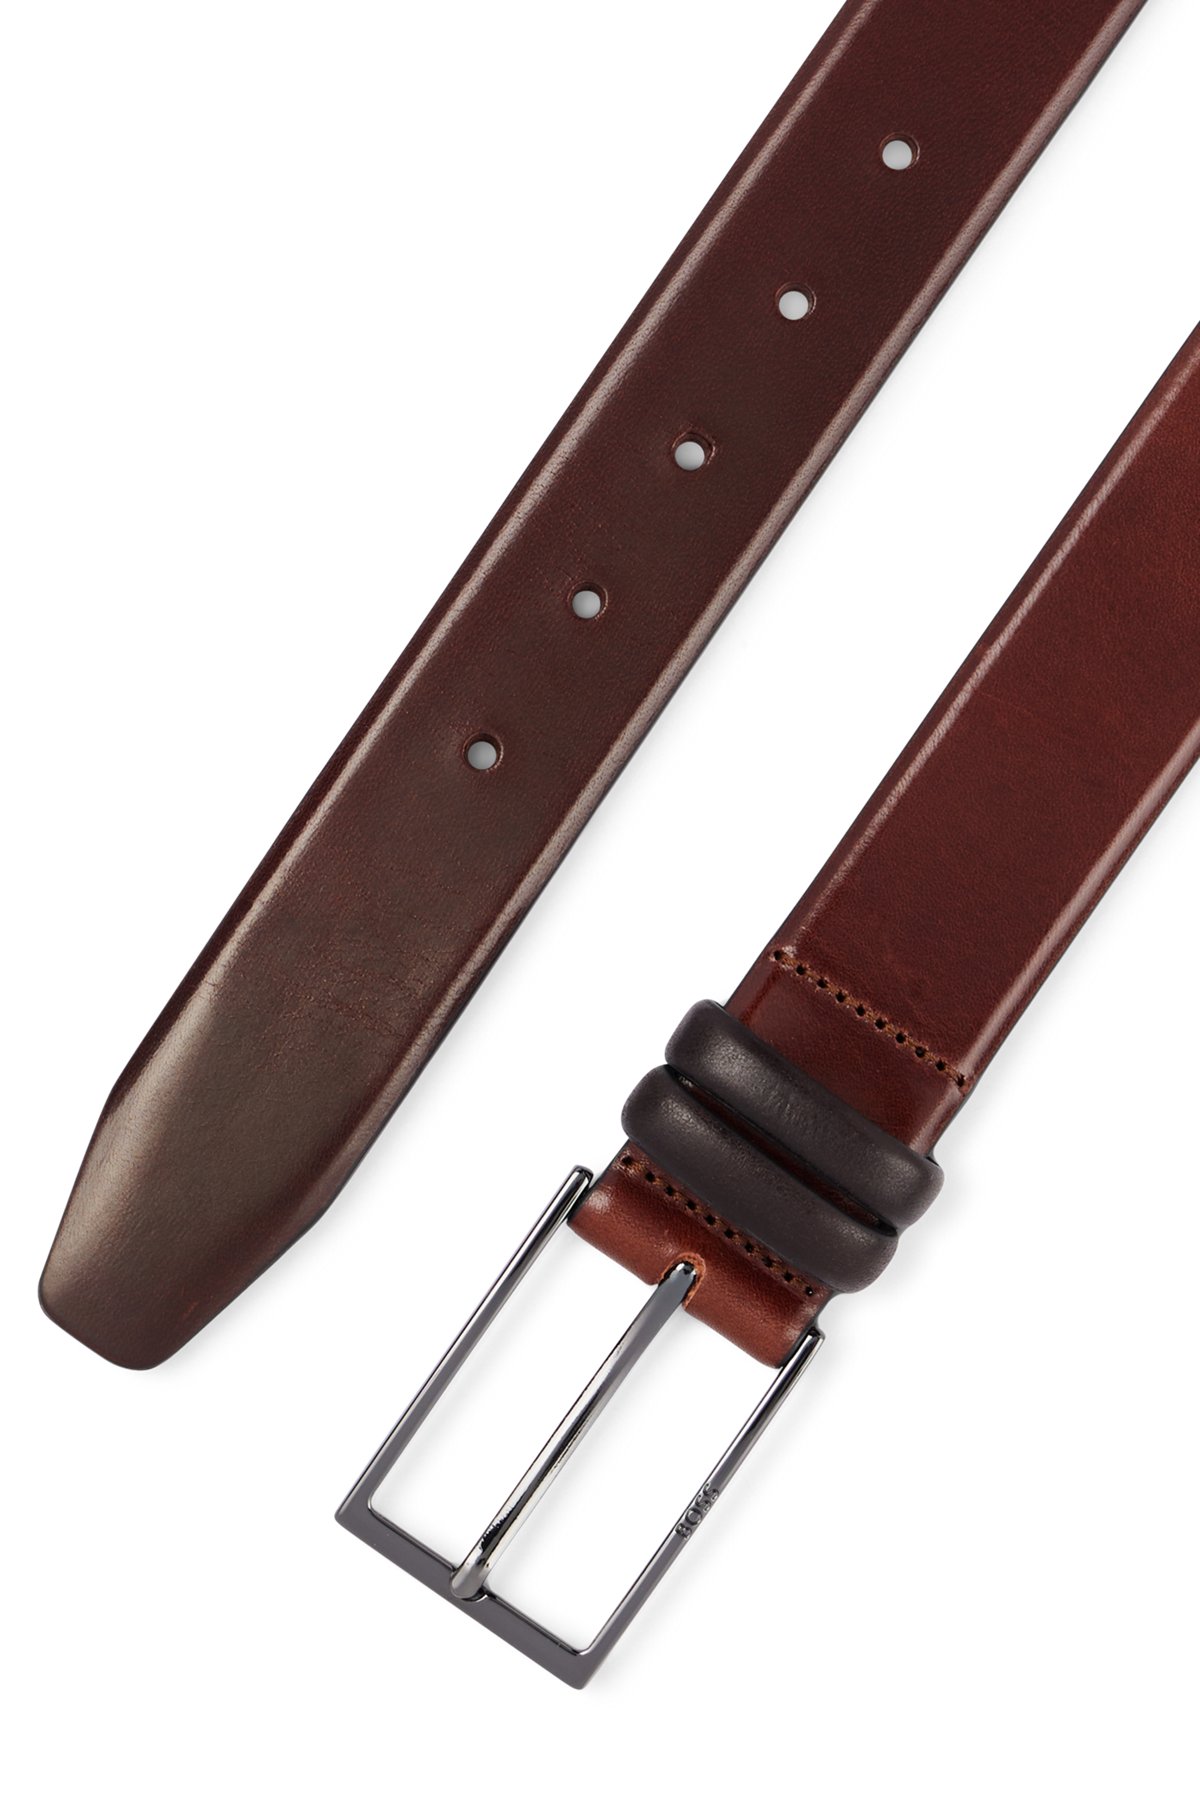 Vegetable-tanned leather belt with gunmetal hardware, Brown